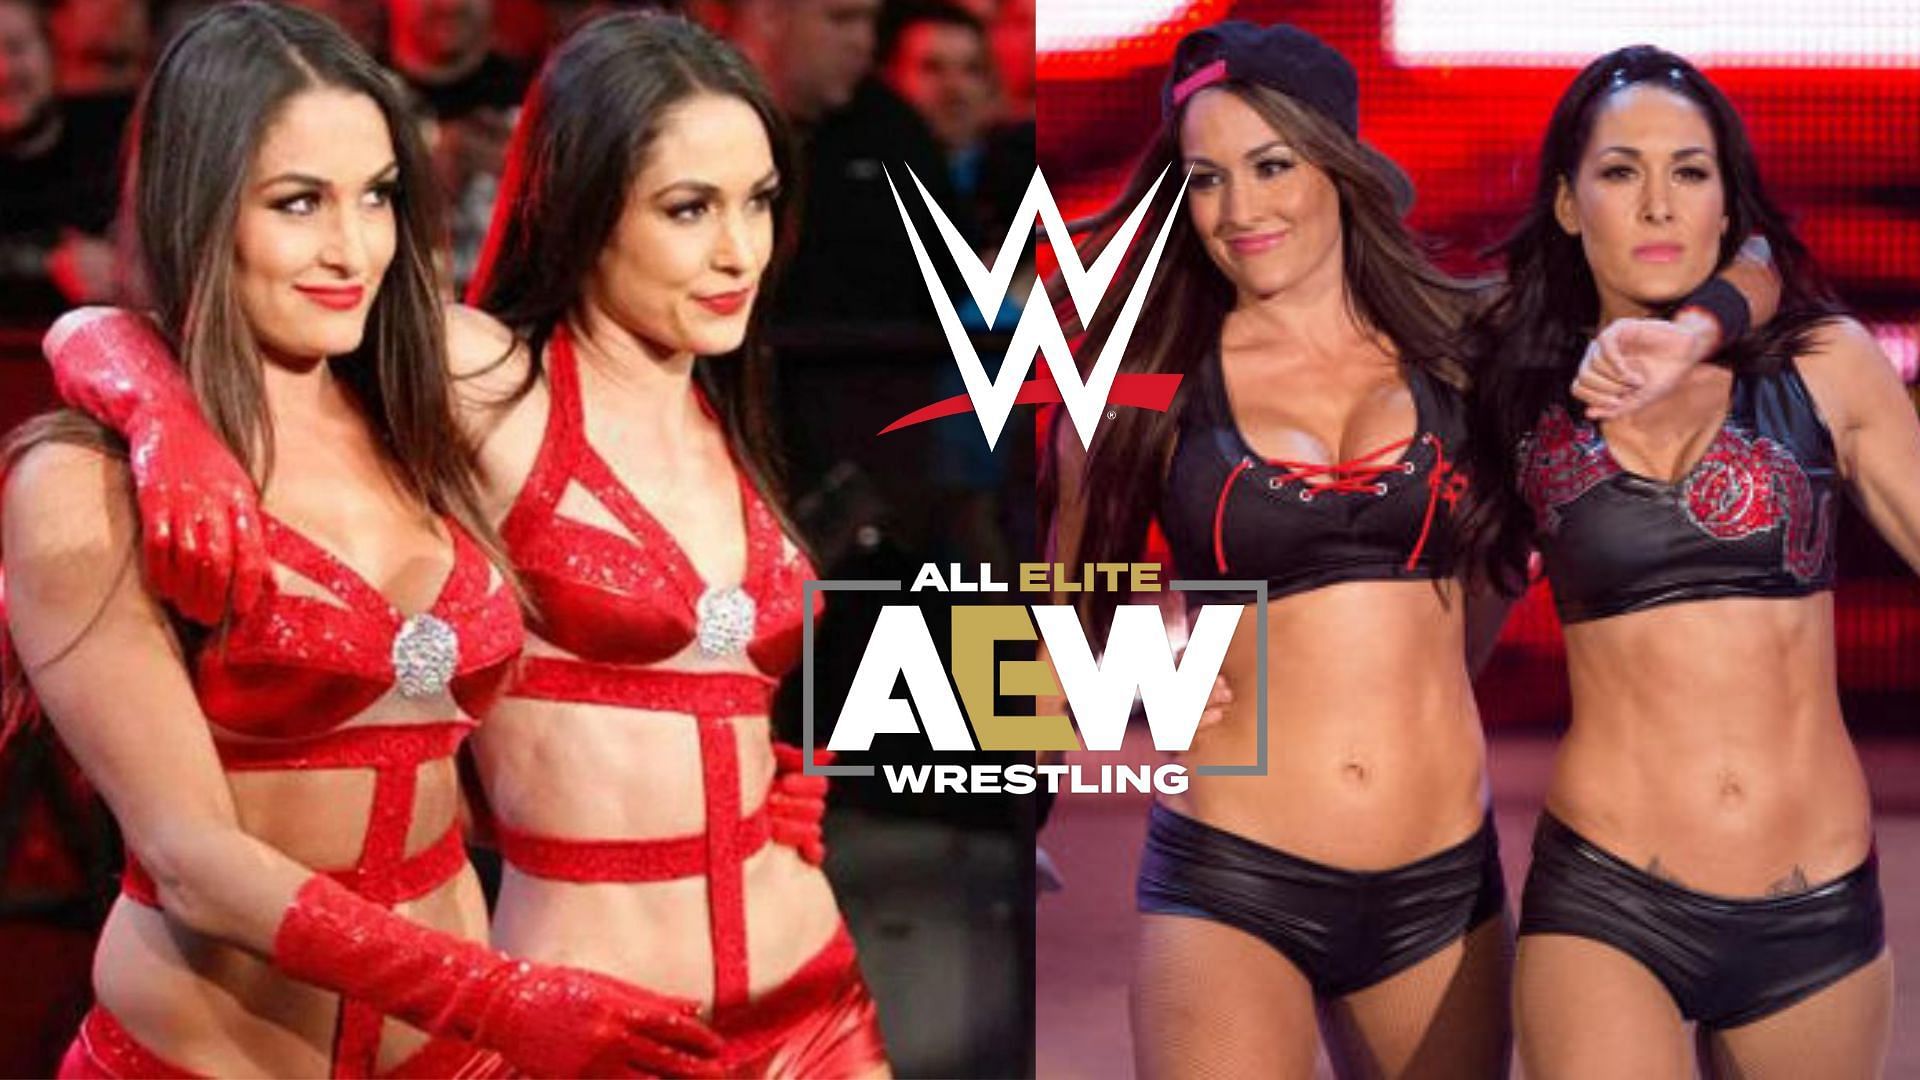 The Bella Twins are WWE Hall of Famers